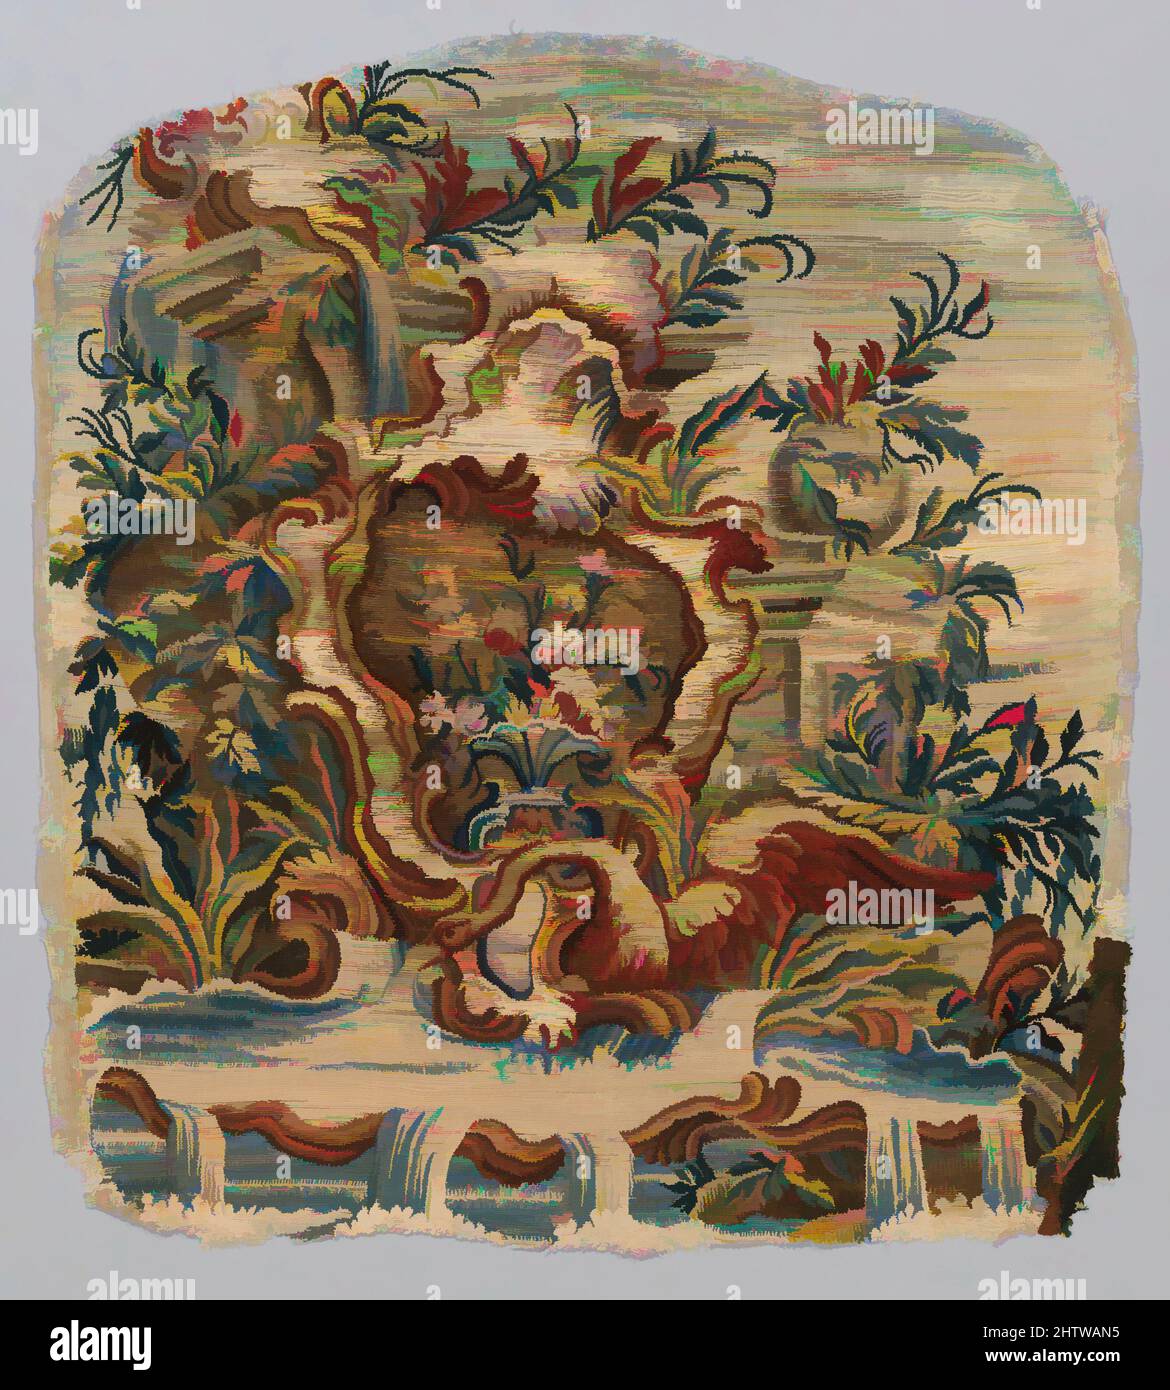 Art inspired by Rocaille cartouches with flowers, ca. 1735–50, French, probably Beauvais, Wool, silk (20-22 warps per inch, 8 per cm.), Back: H. 27 1/2 x W. 24 in. (69.9 x 61 cm); seat: H. 29 x W. 31 in. (73.7 x 78.7 cm), Textiles-Tapestries, Classic works modernized by Artotop with a splash of modernity. Shapes, color and value, eye-catching visual impact on art. Emotions through freedom of artworks in a contemporary way. A timeless message pursuing a wildly creative new direction. Artists turning to the digital medium and creating the Artotop NFT Stock Photo